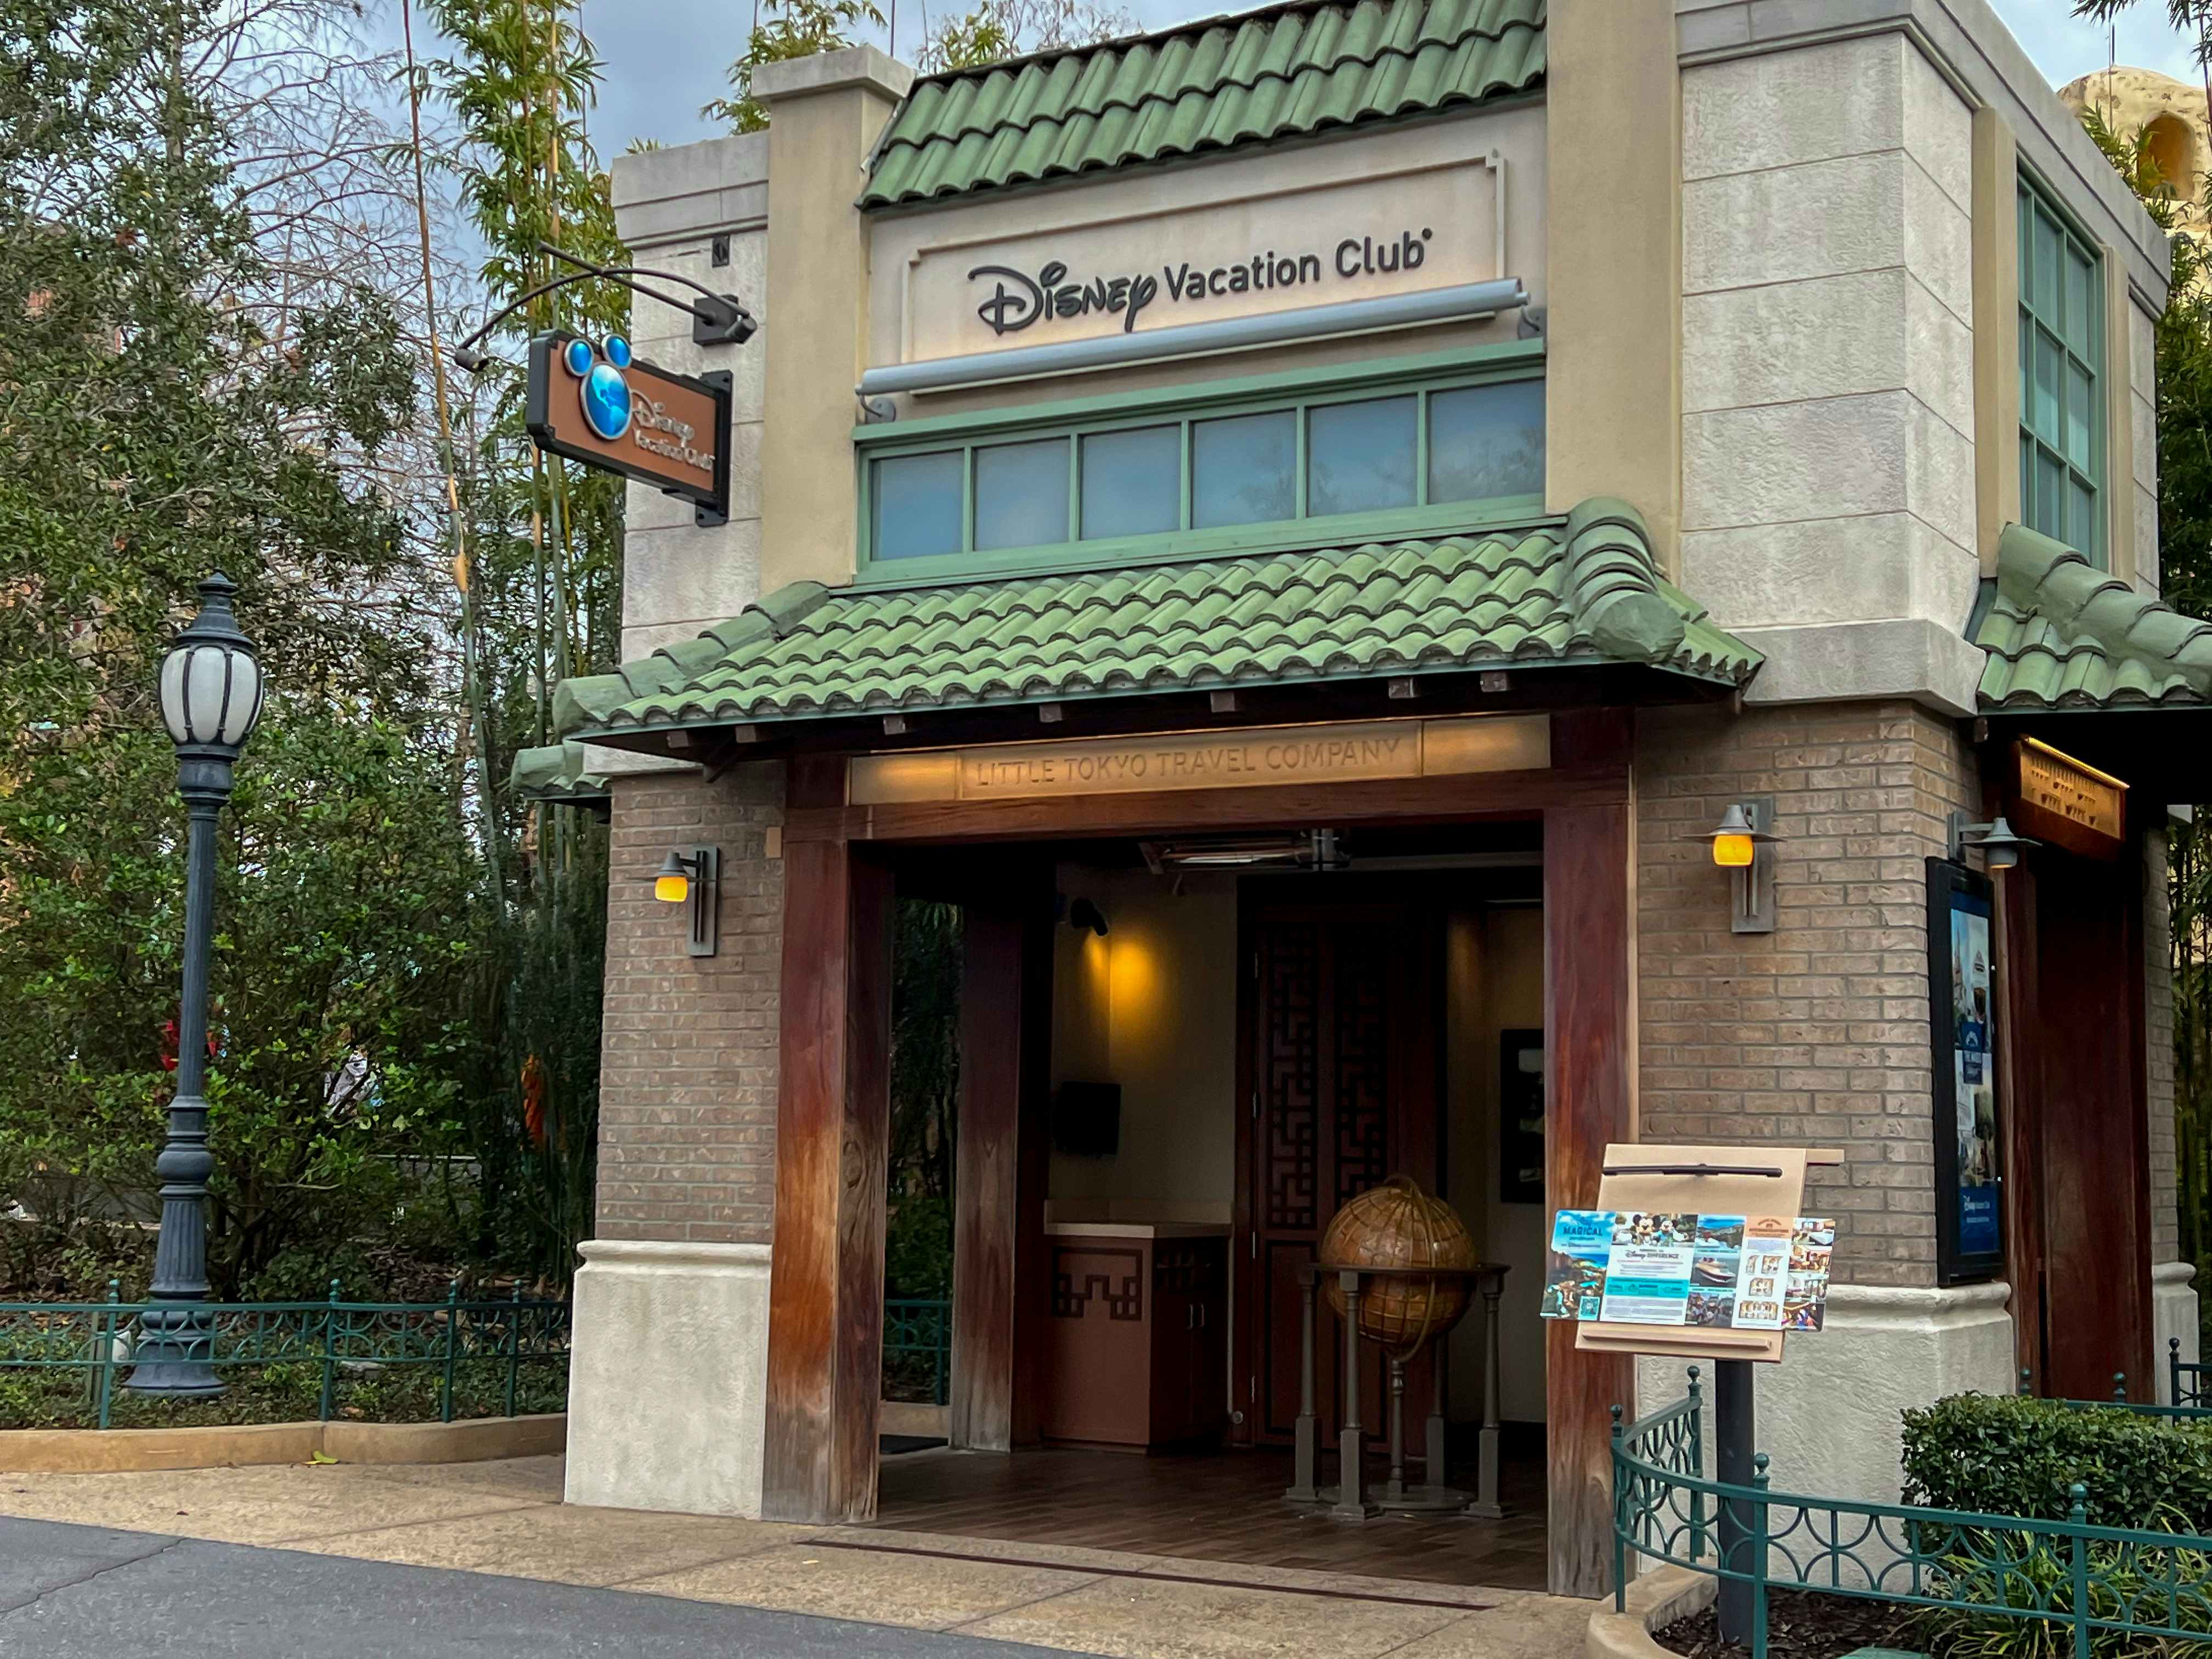 The entrance to the Disney Vacation Club building.